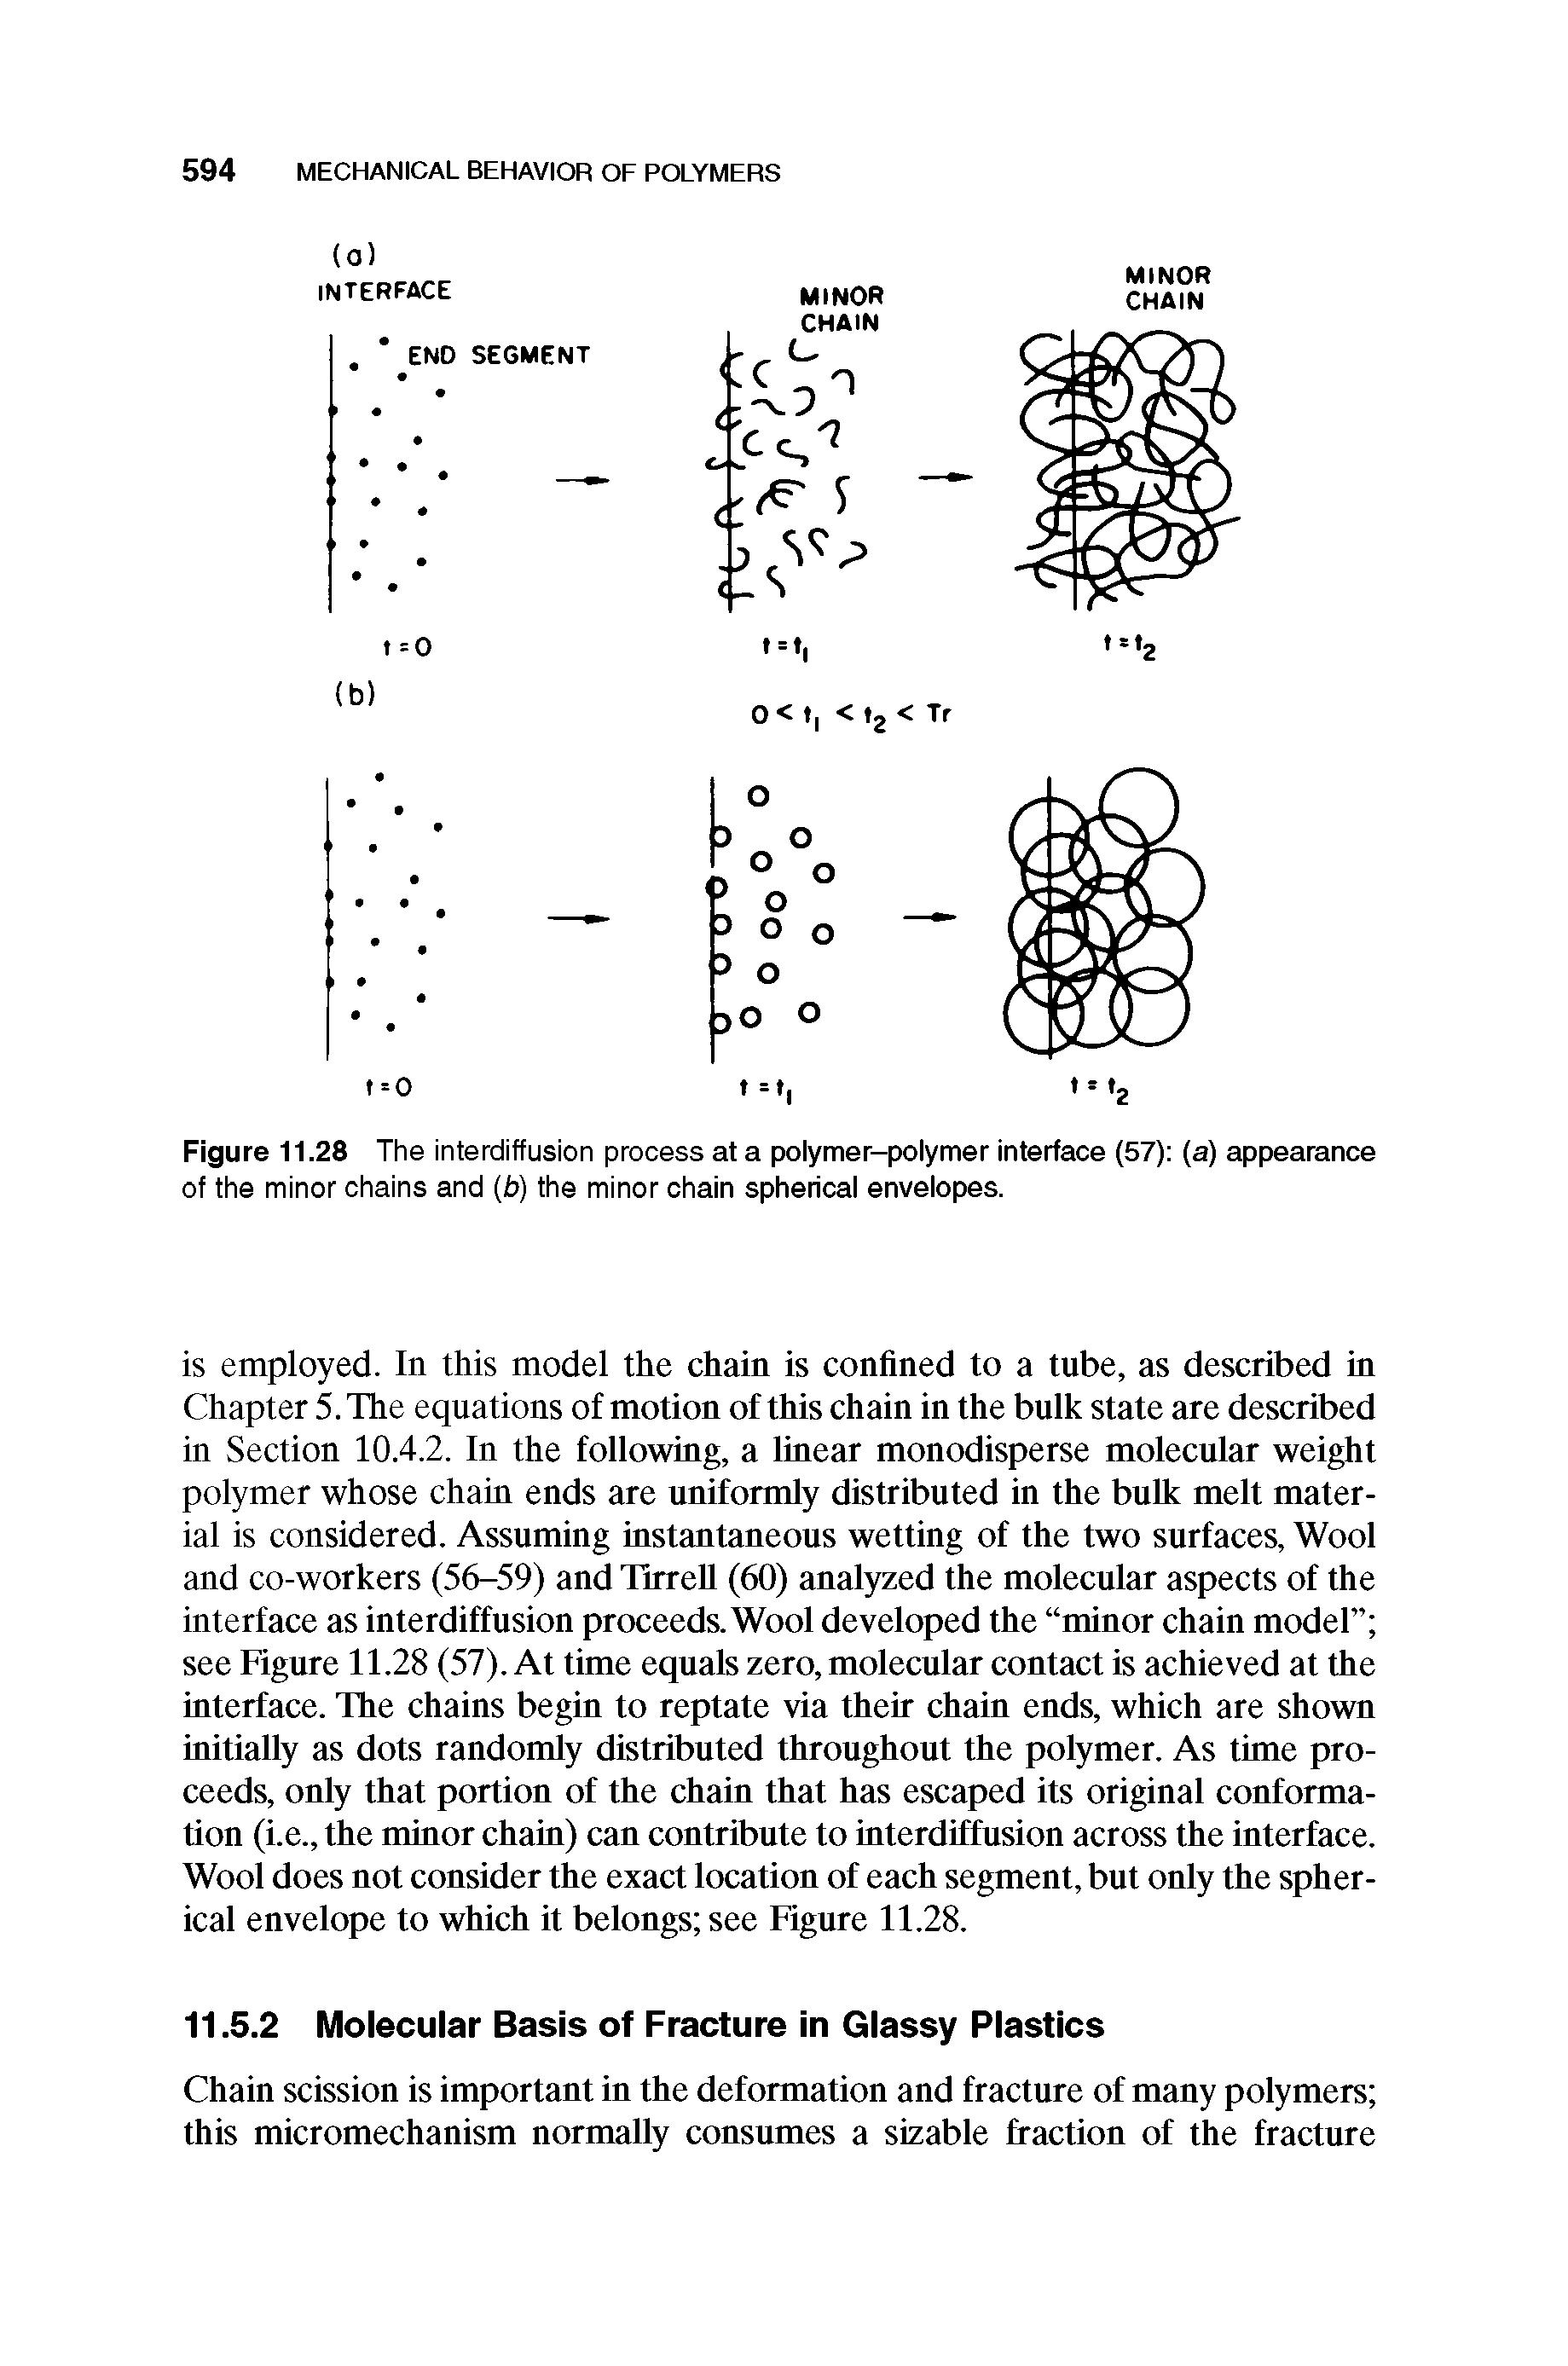 Figure 11.28 The interdiffusion process at a polymer-polymer interface (57) (a) appearance of the minor chains and (b) the minor chain spherical envelopes.